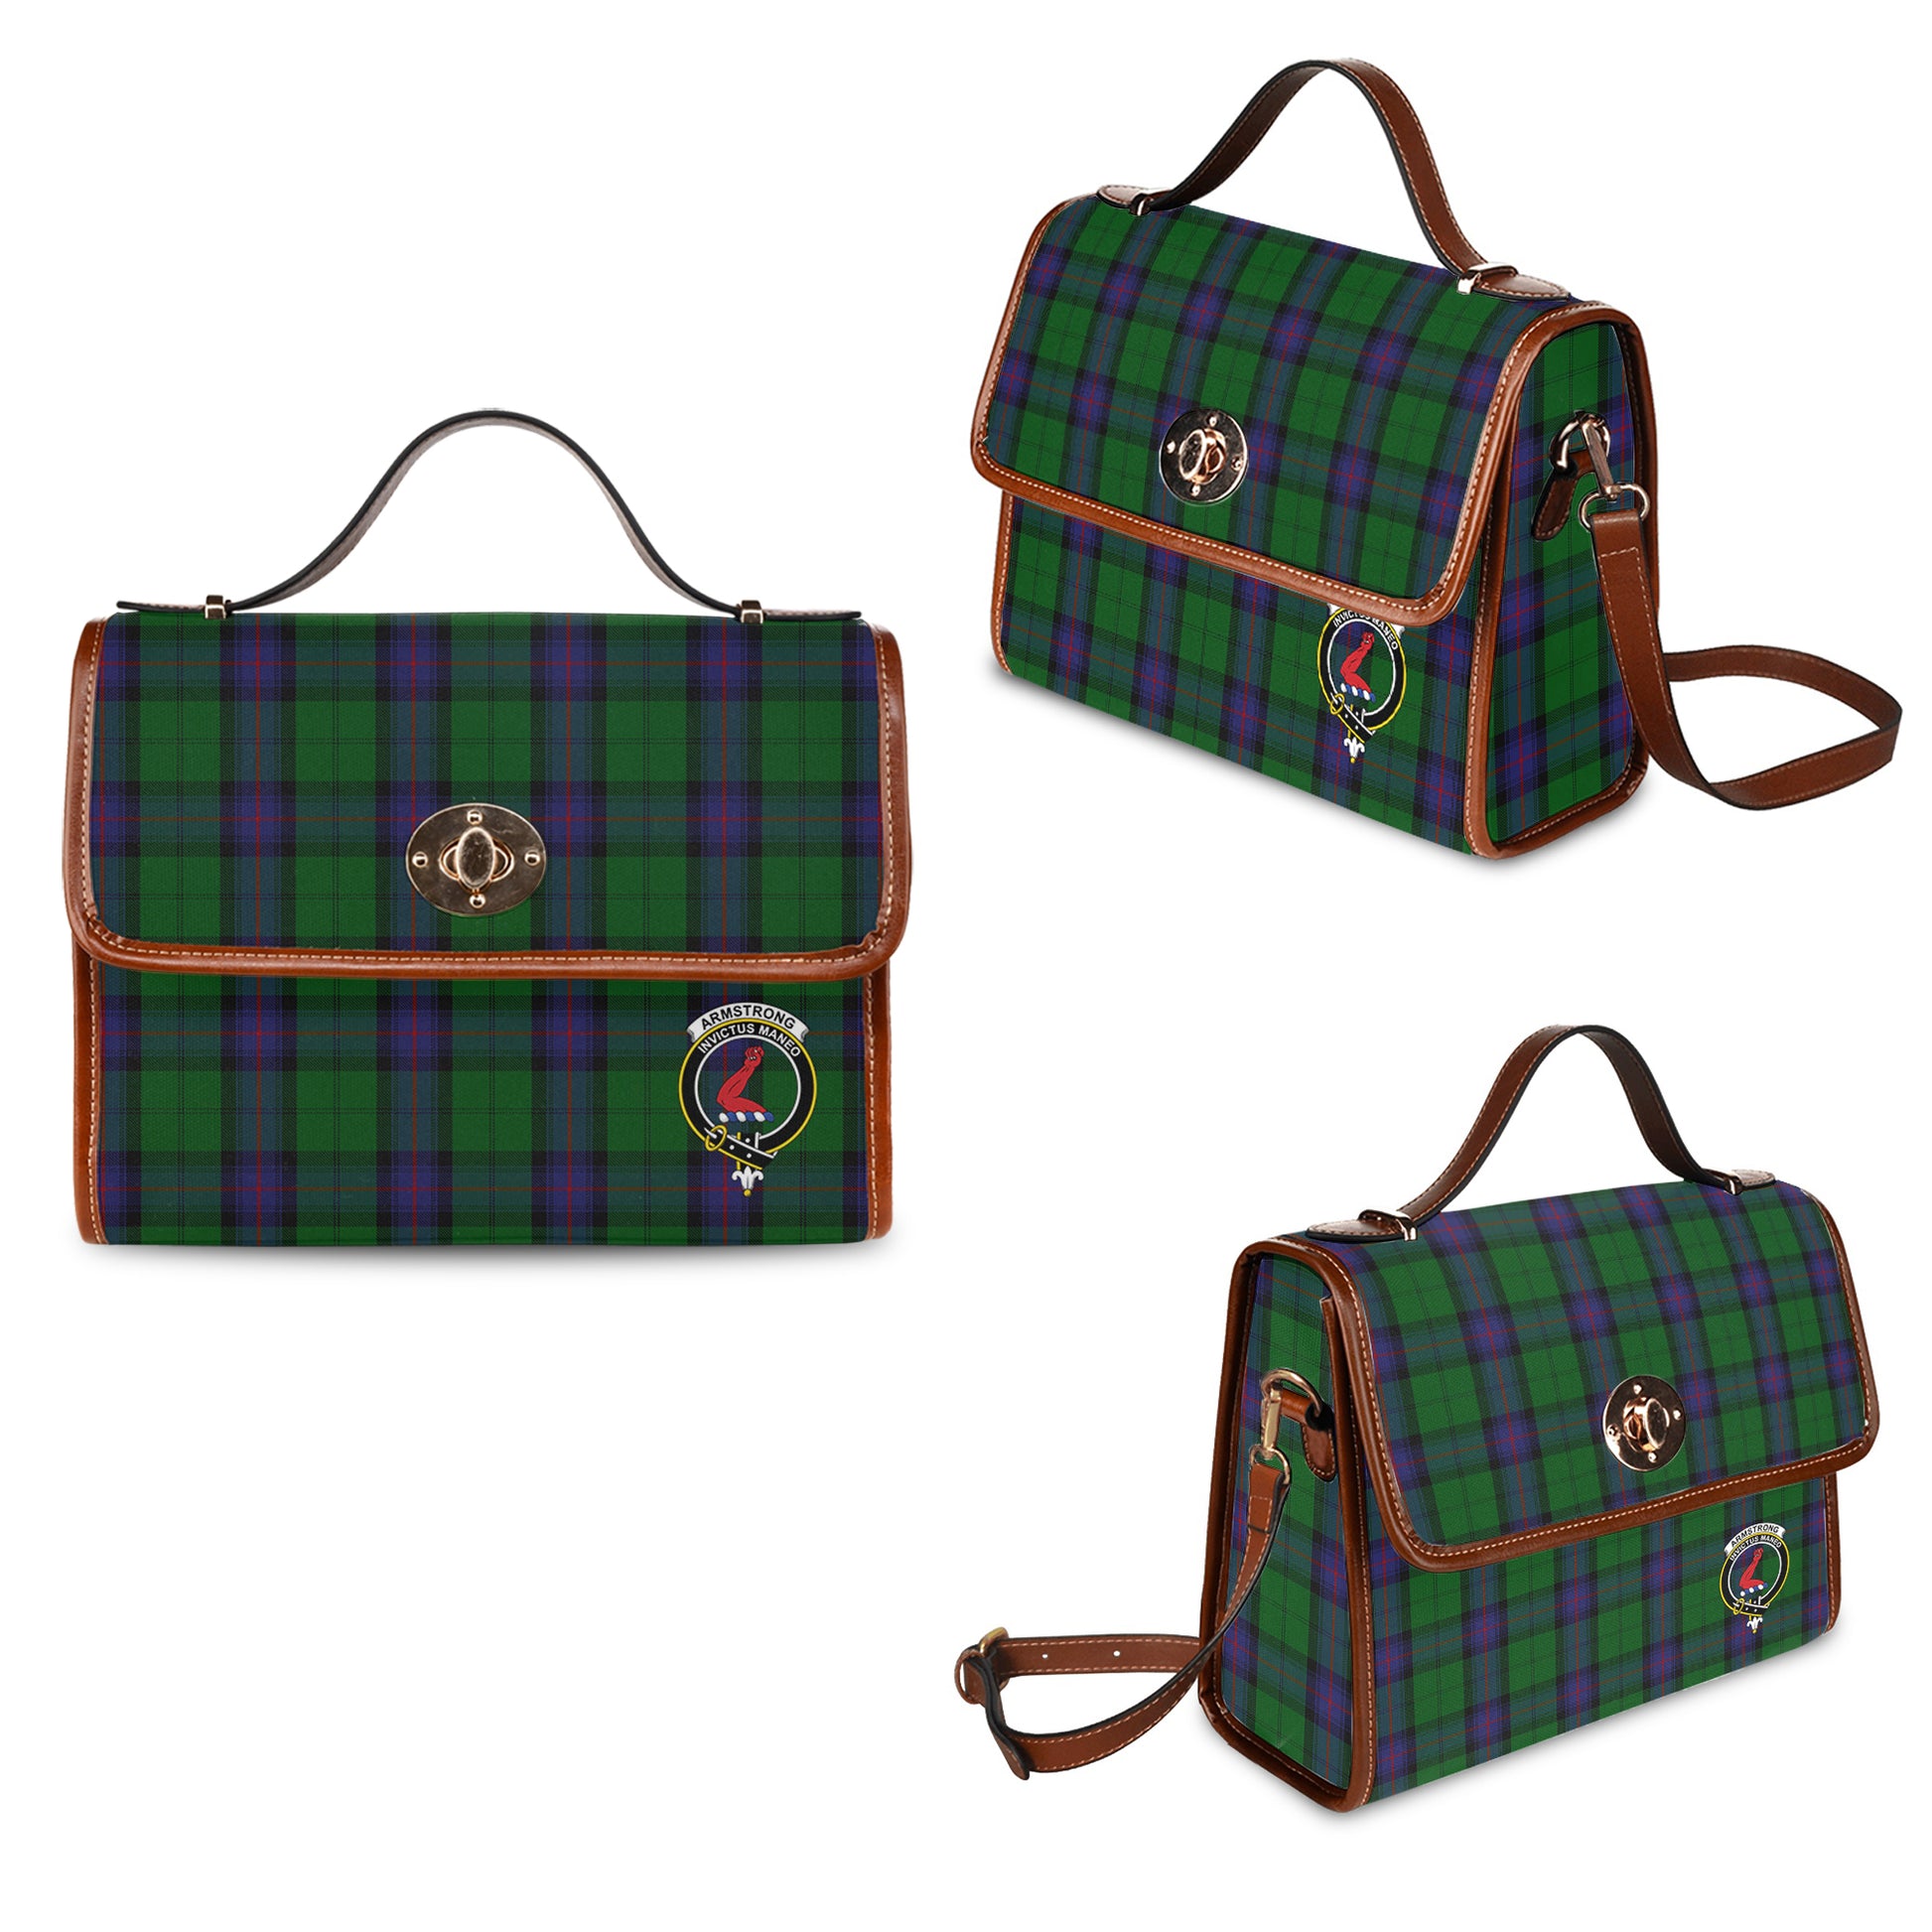 Armstrong Tartan Leather Strap Waterproof Canvas Bag with Family Crest One Size 34cm * 42cm (13.4" x 16.5") - Tartanvibesclothing